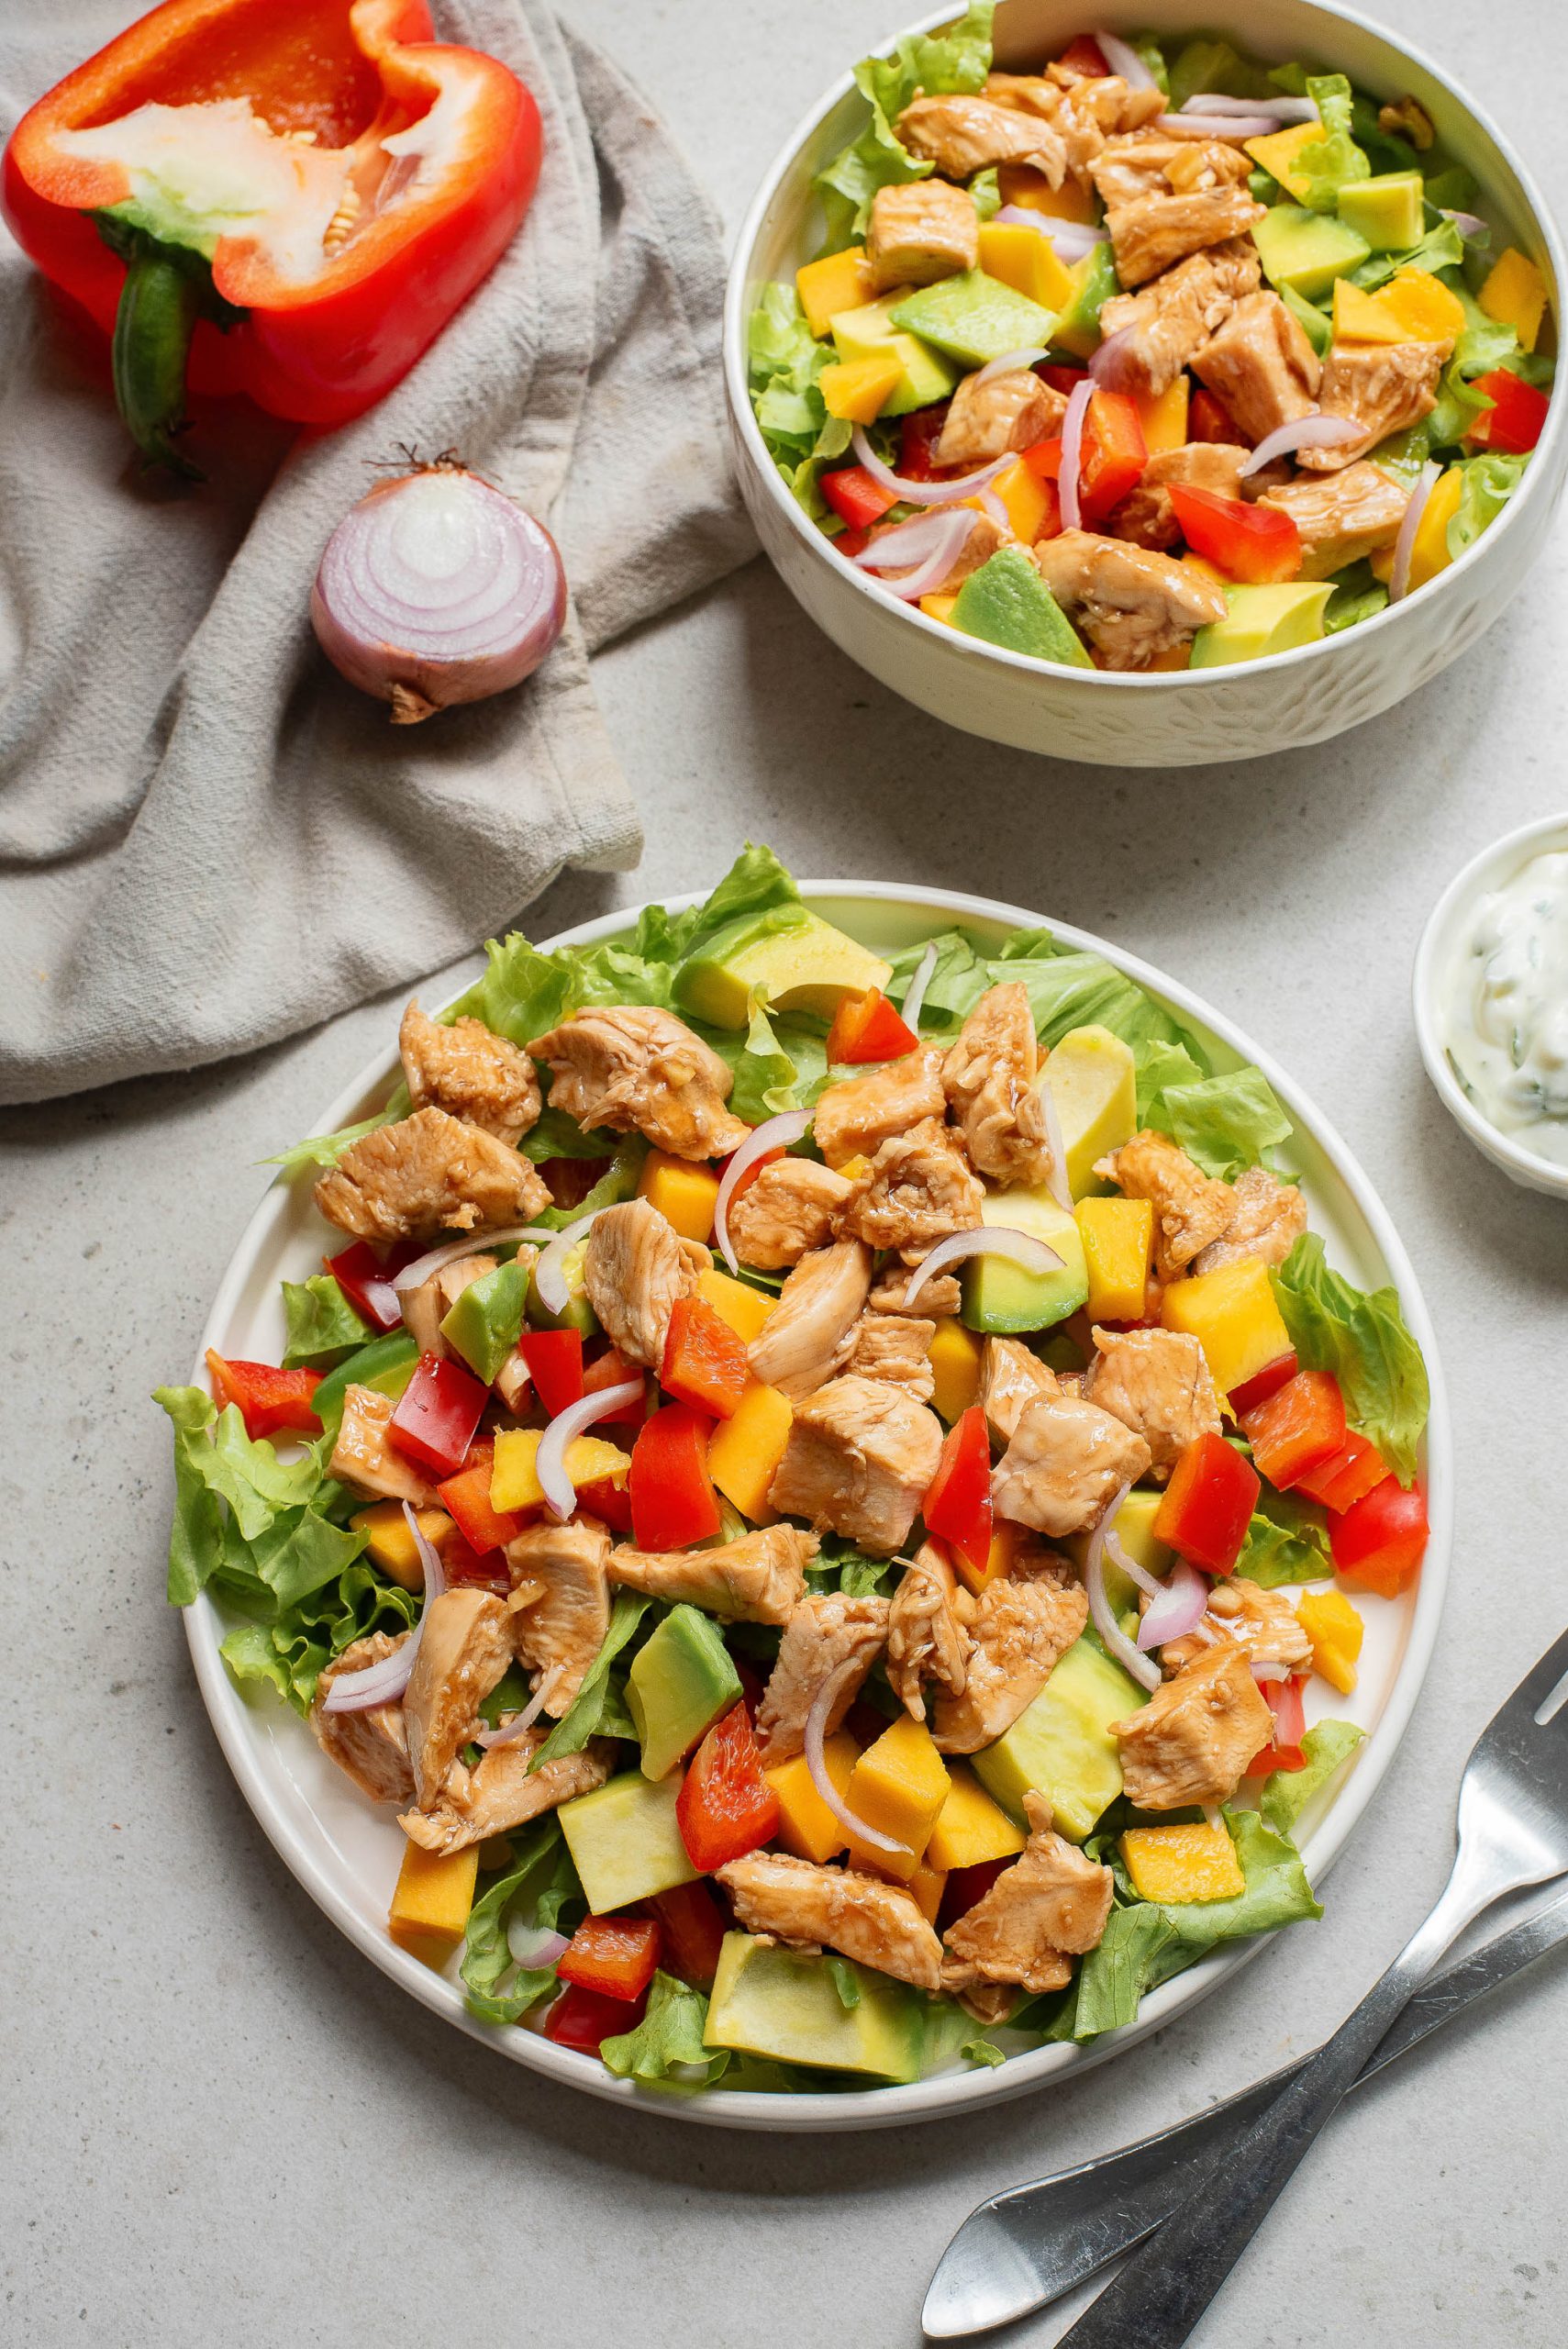 A plate of salad with chicken and vegetables.